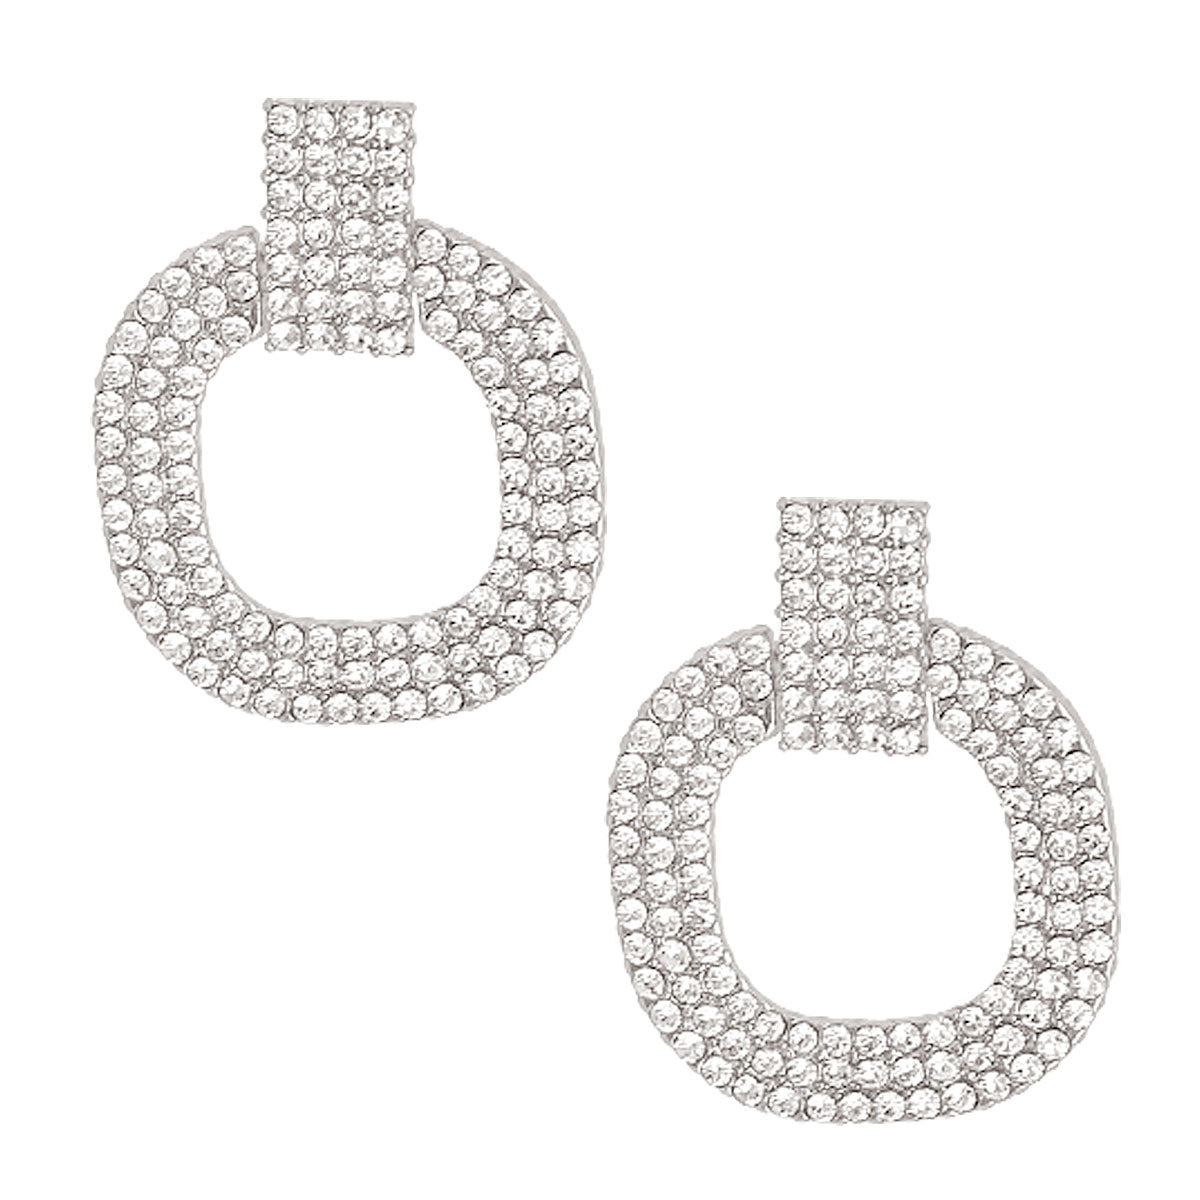 Silver Pave Squared Earrings